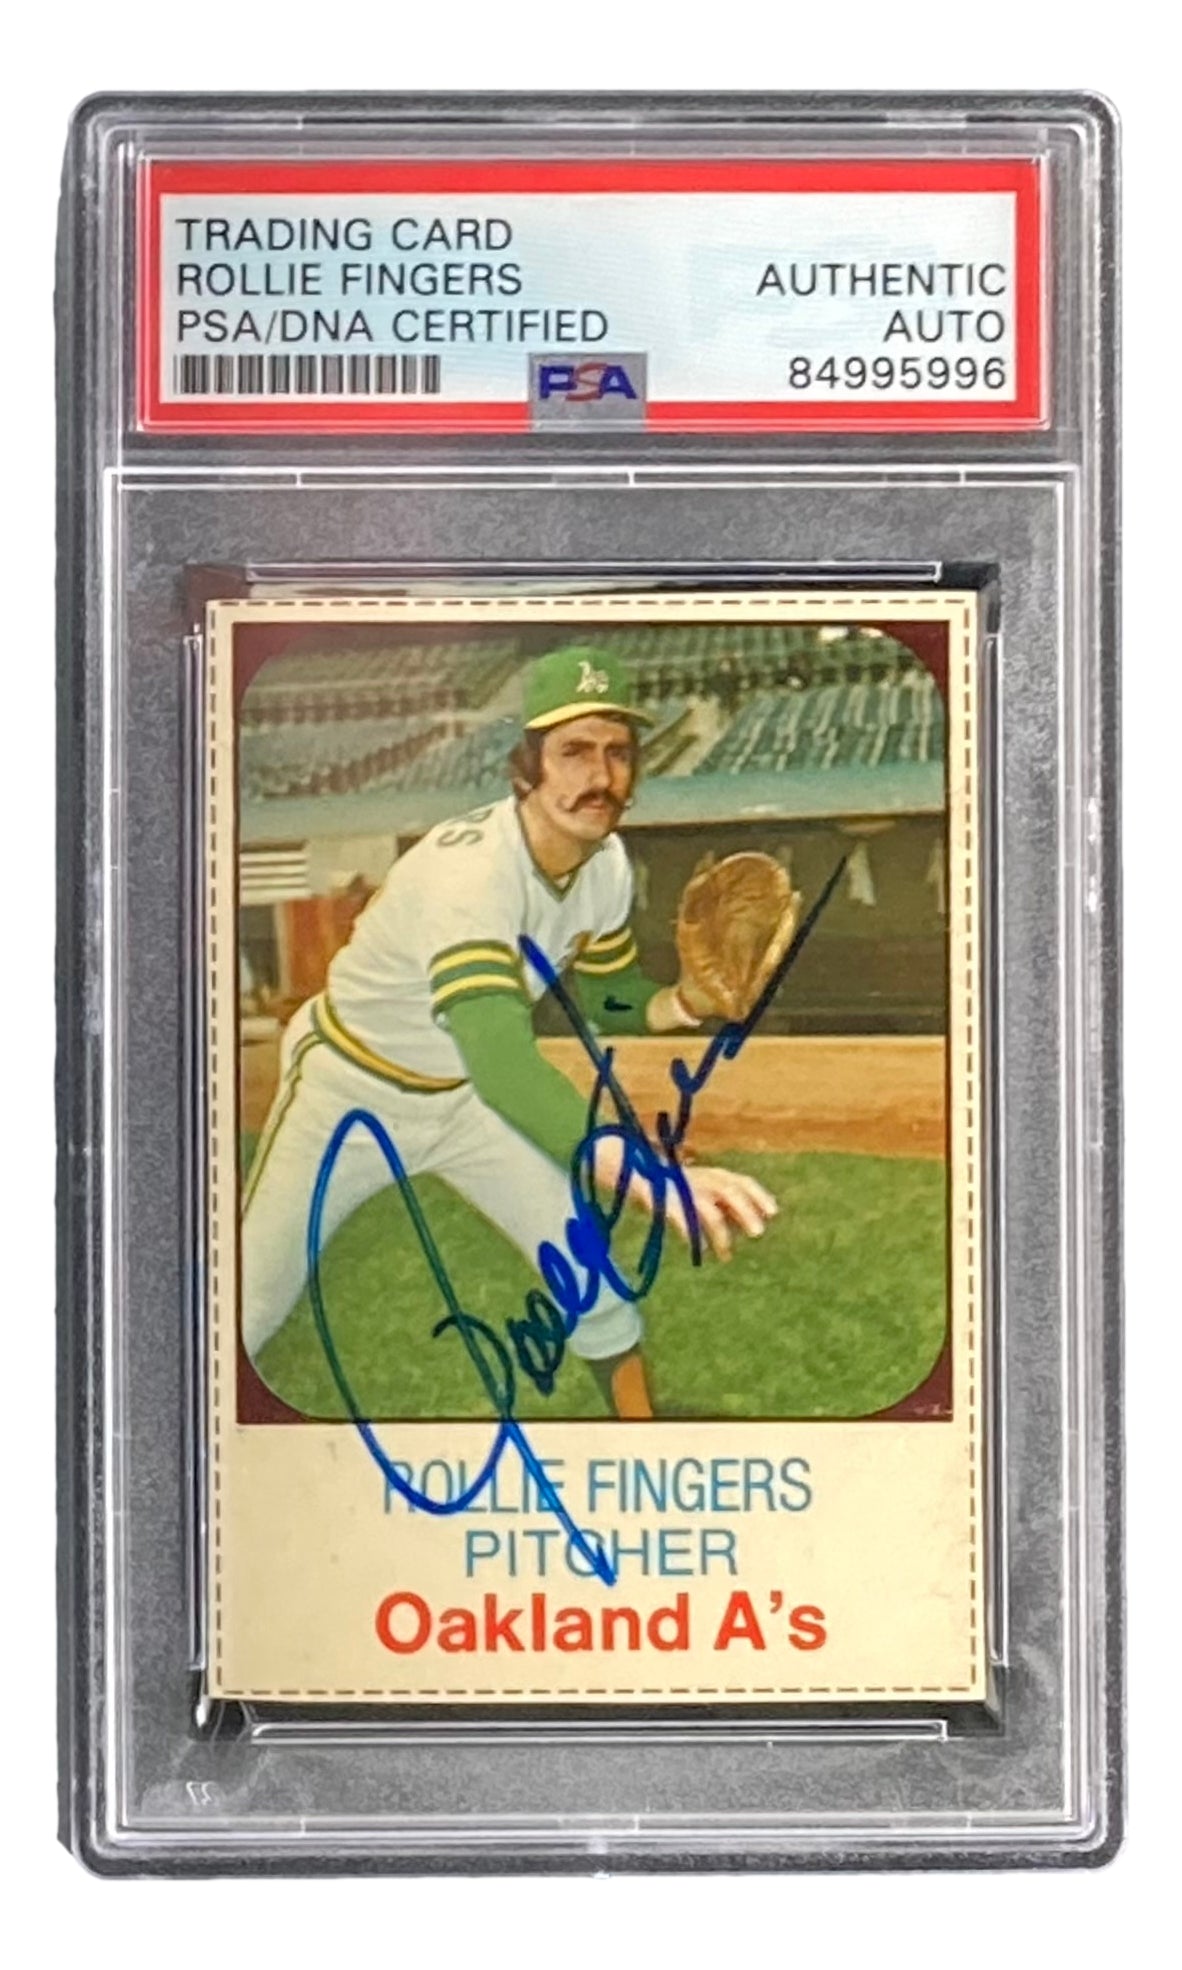 MLB Rollie Fingers Signed Trading Cards, Collectible Rollie Fingers Signed  Trading Cards